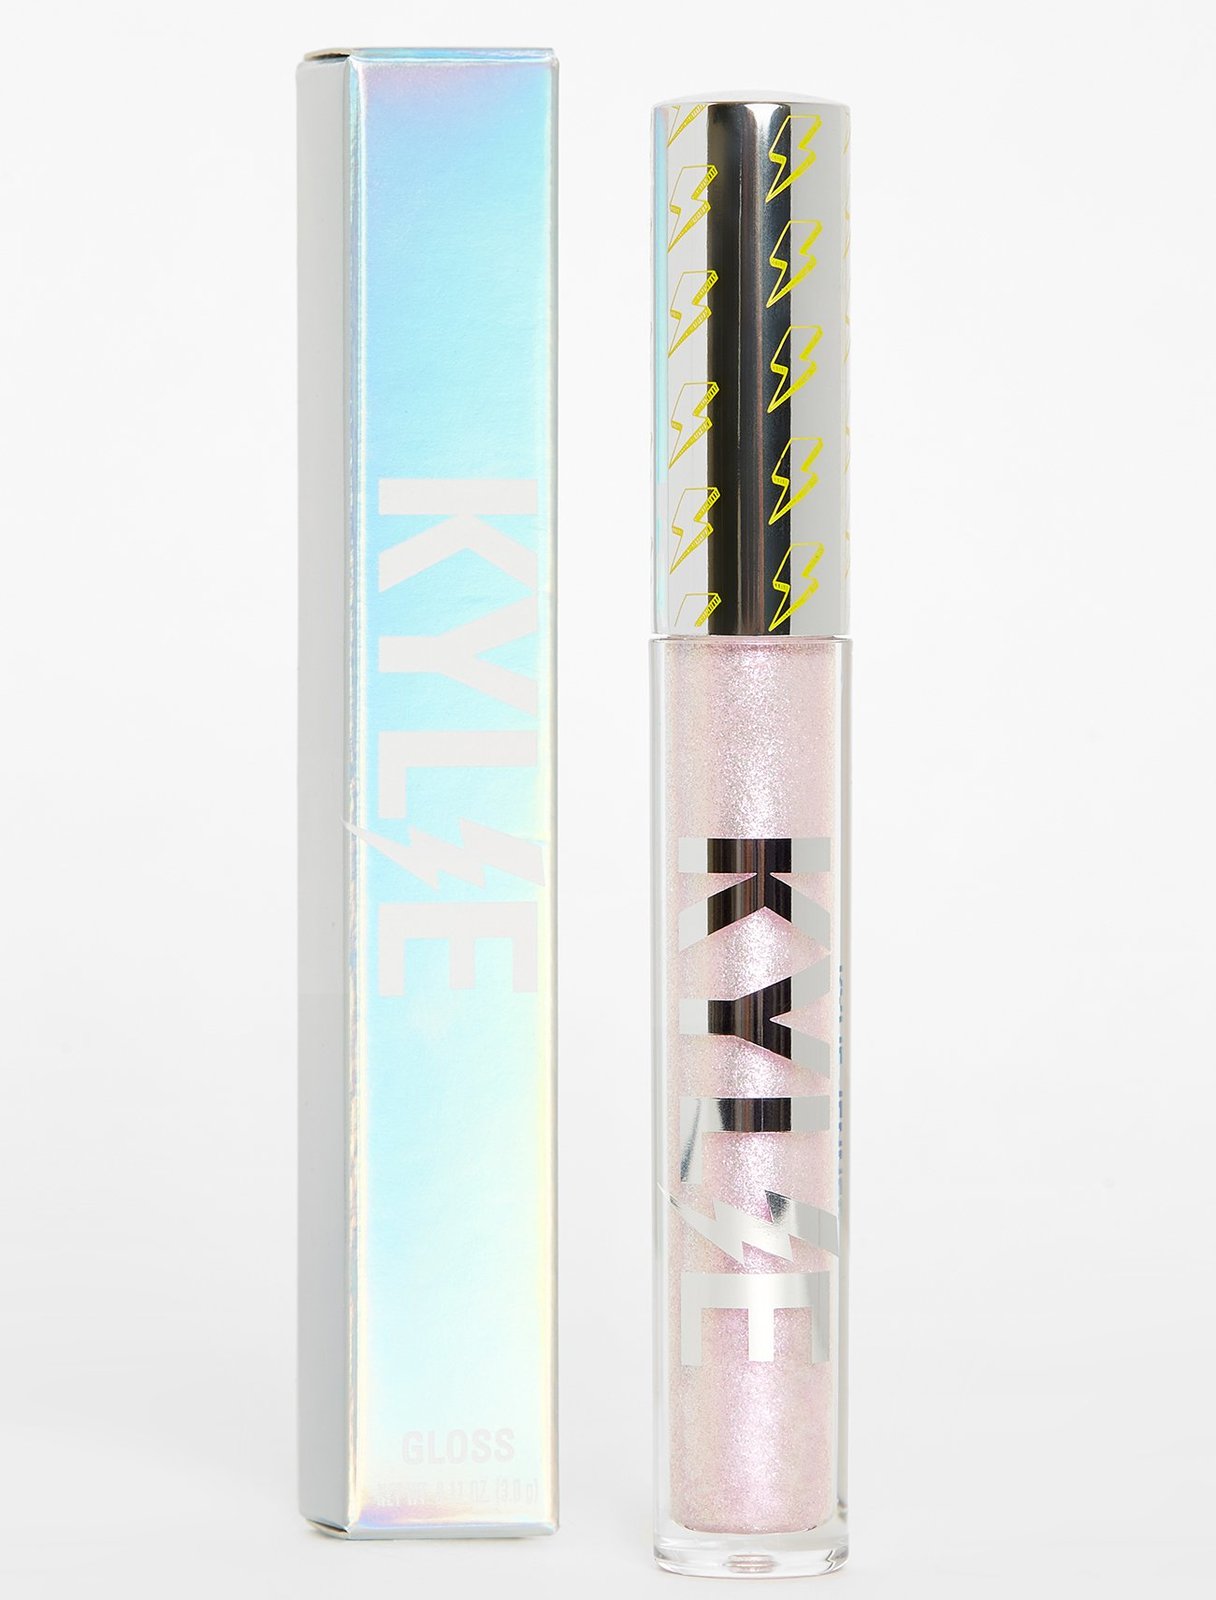 Kylie Cosmetics Weather Collection, *Flash* Lip Gloss - $45.00